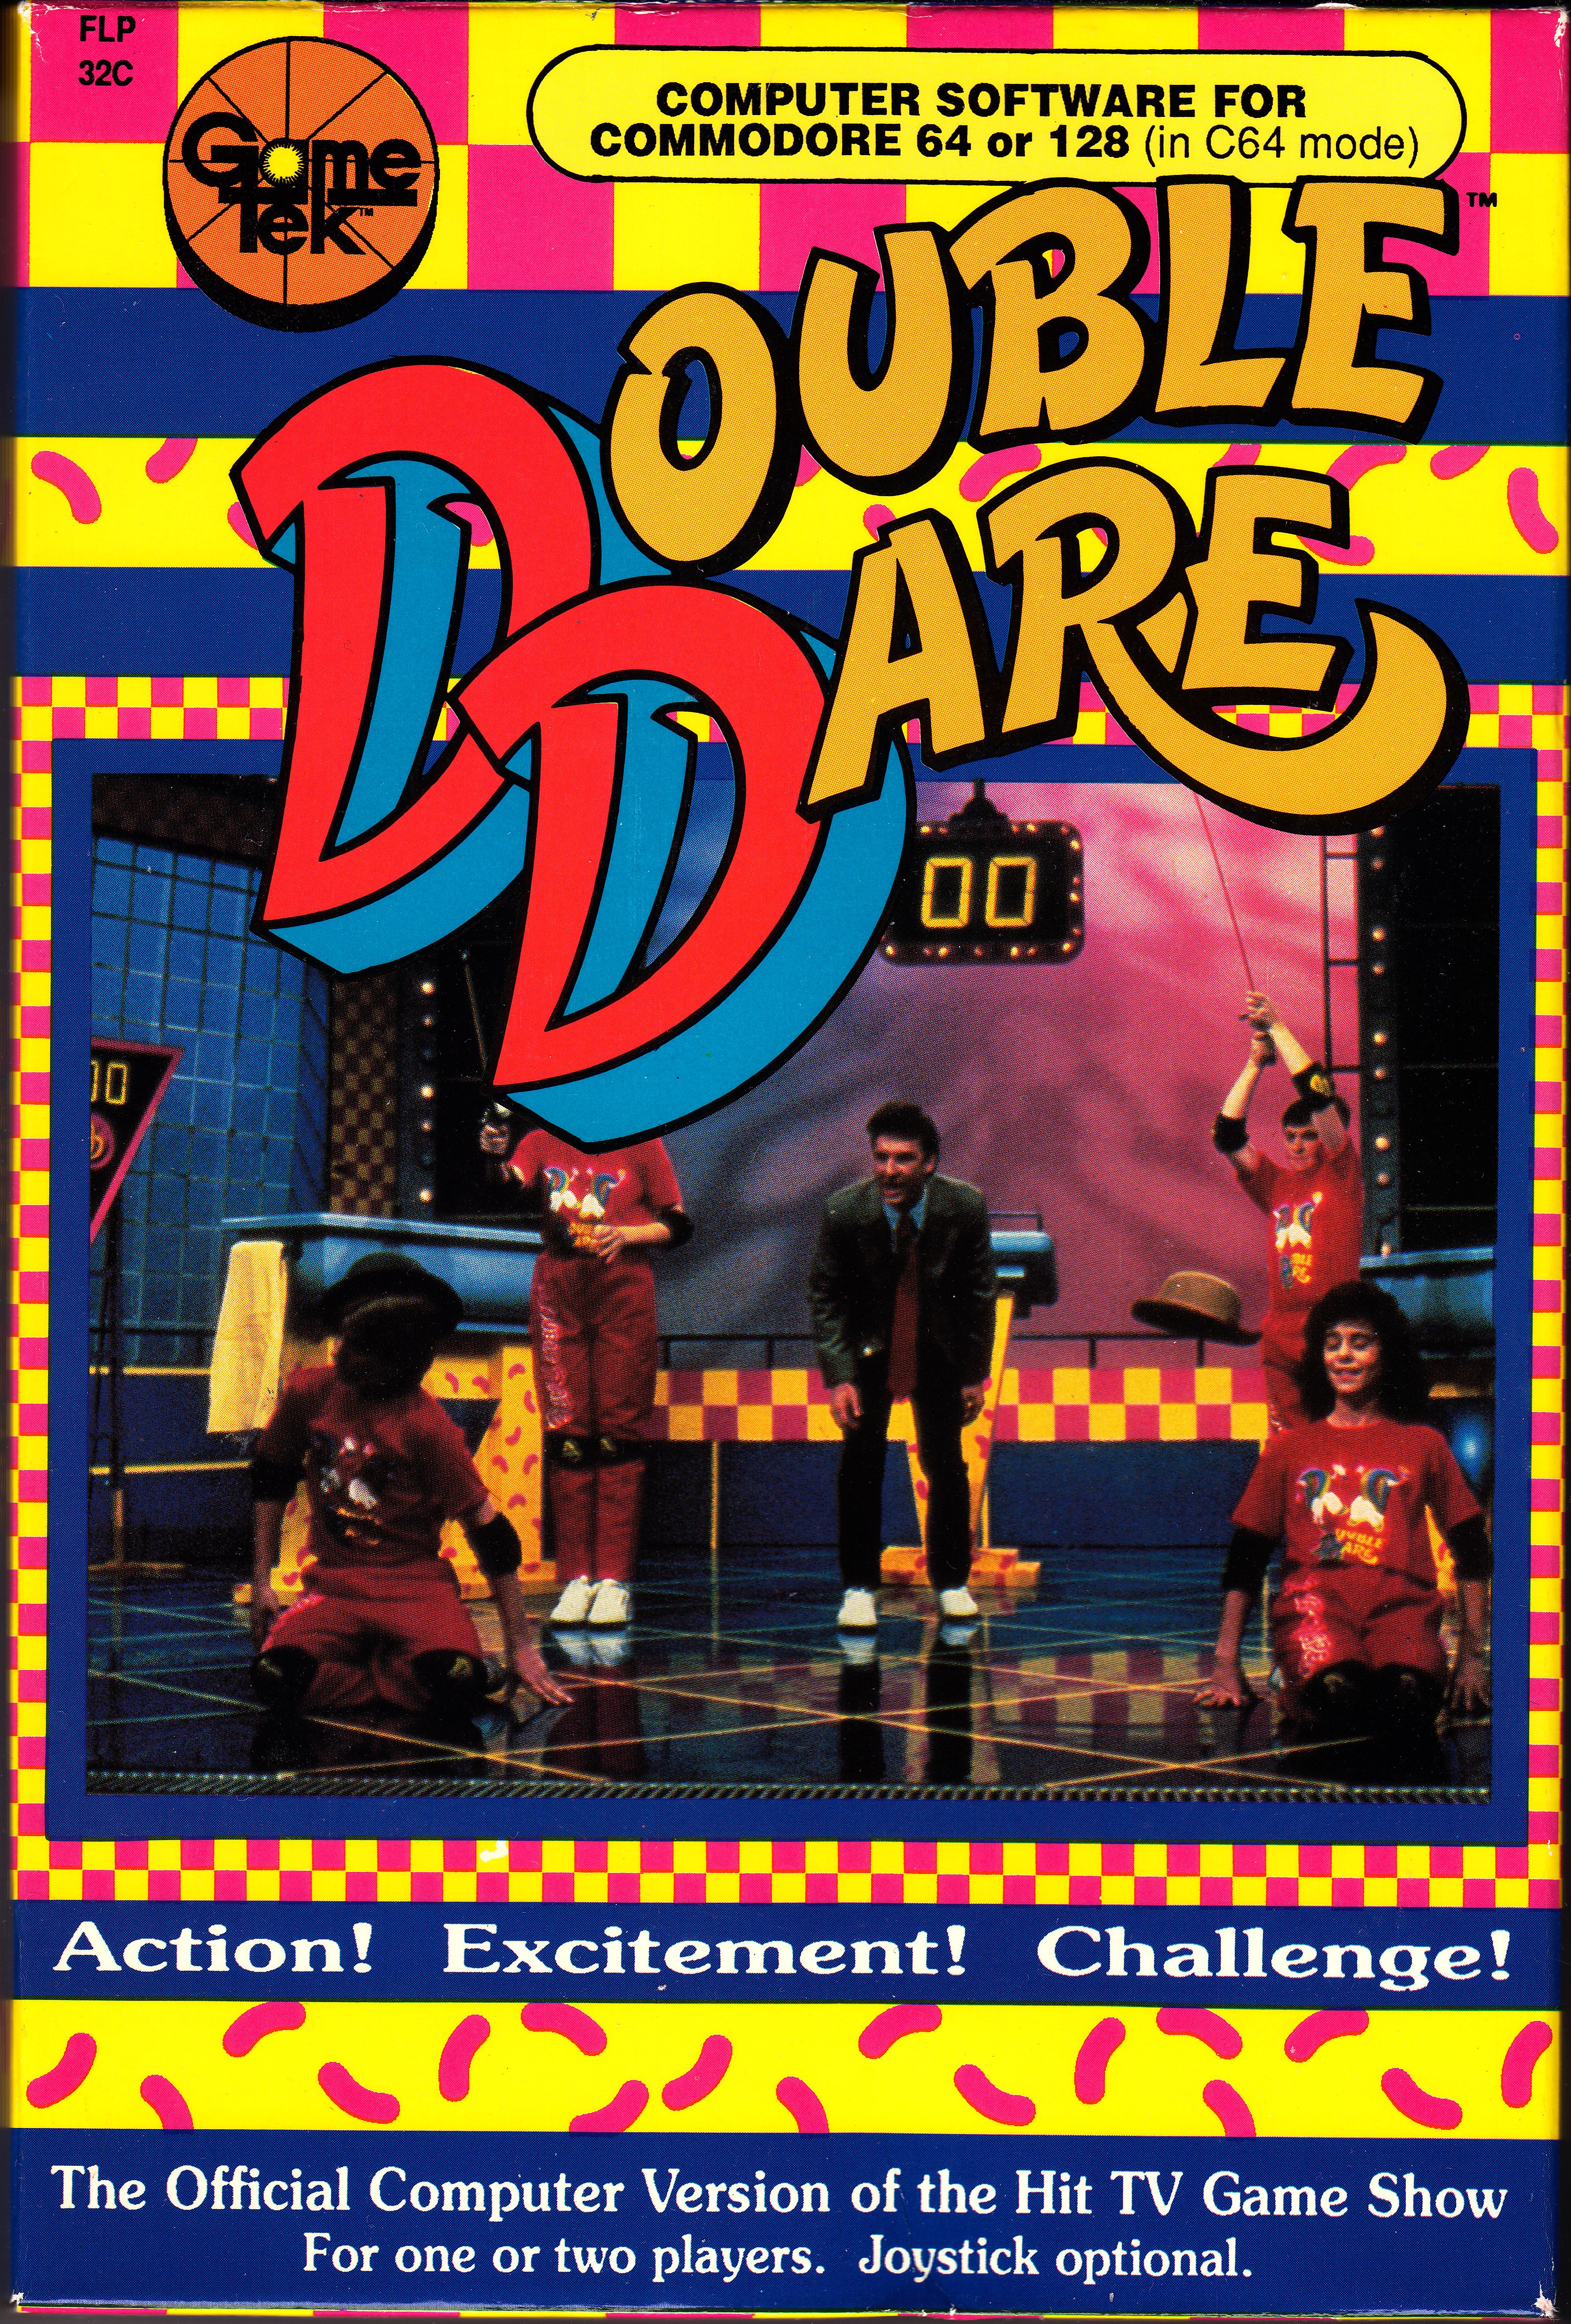 Double dare nes rom torrent loaded by marcus eddie torrent